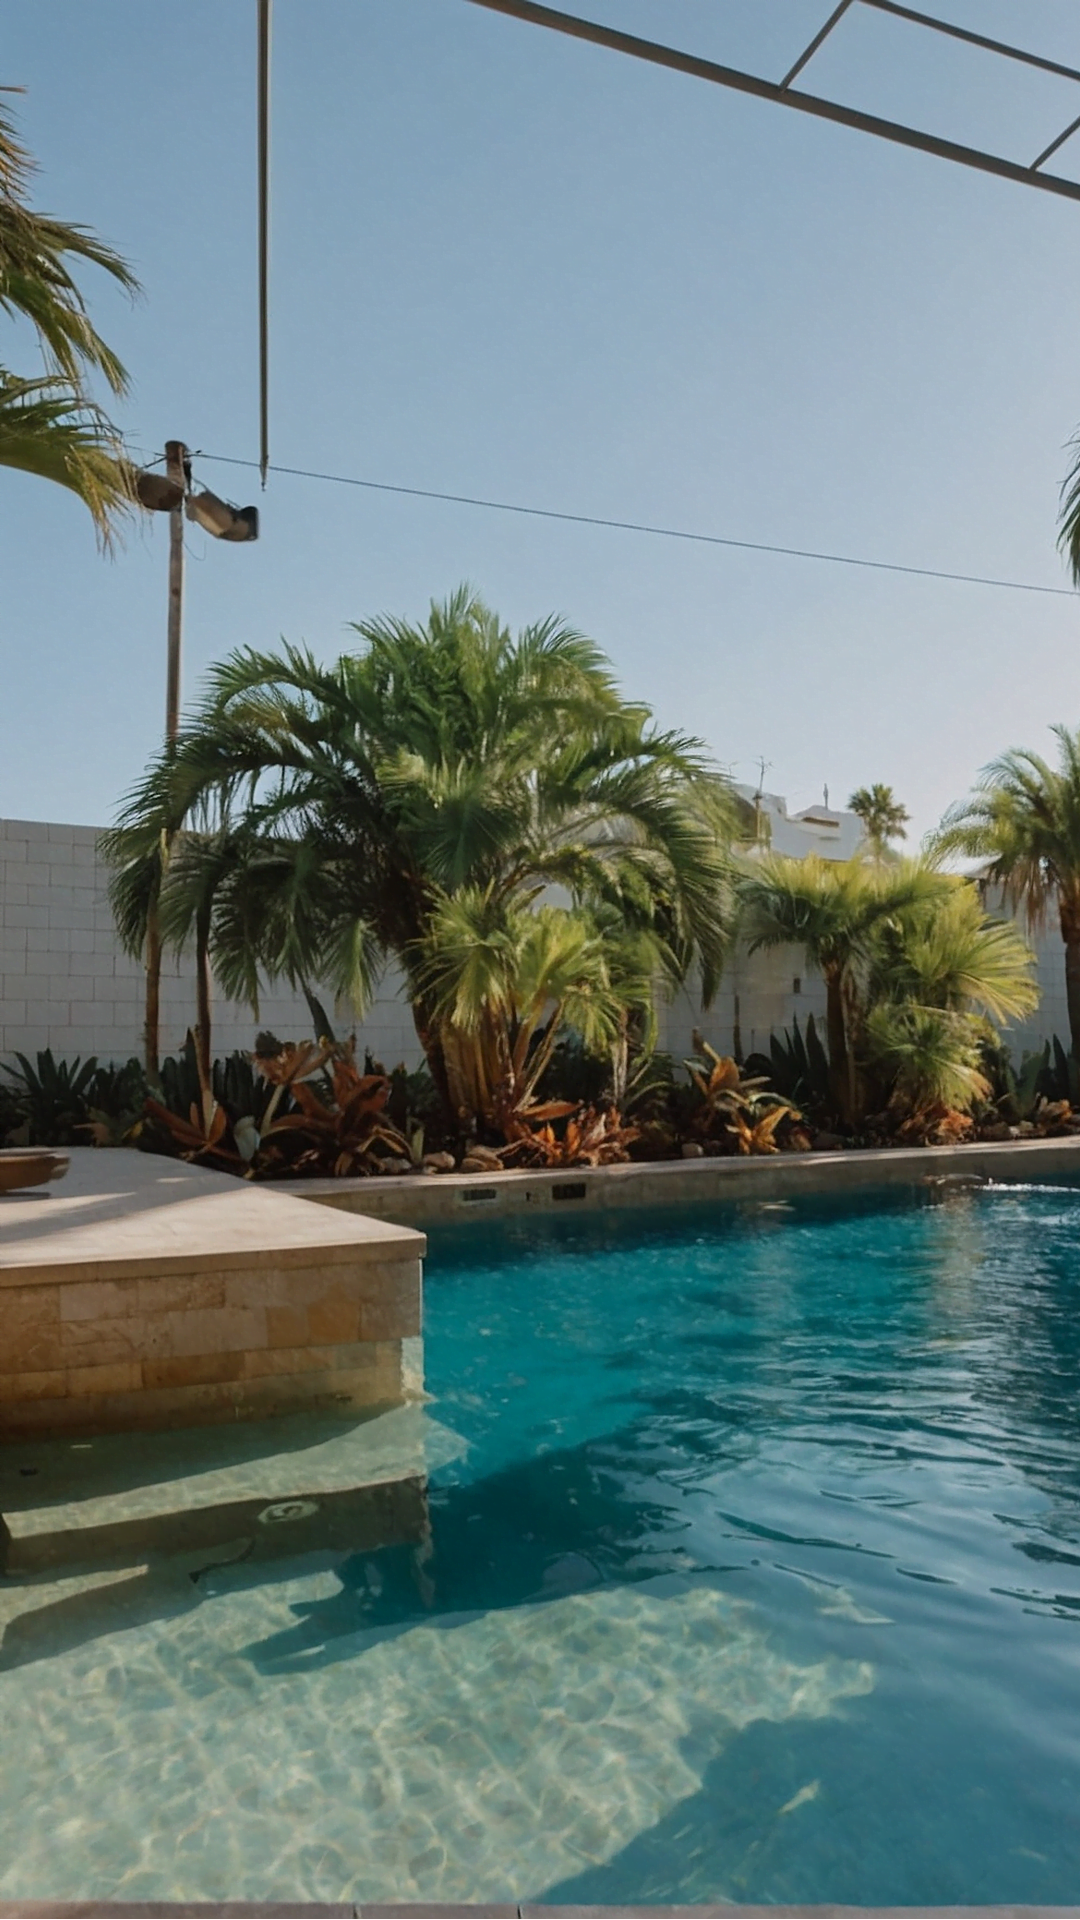 Safe and Sound: Non-toxic Plants for Pool Areas